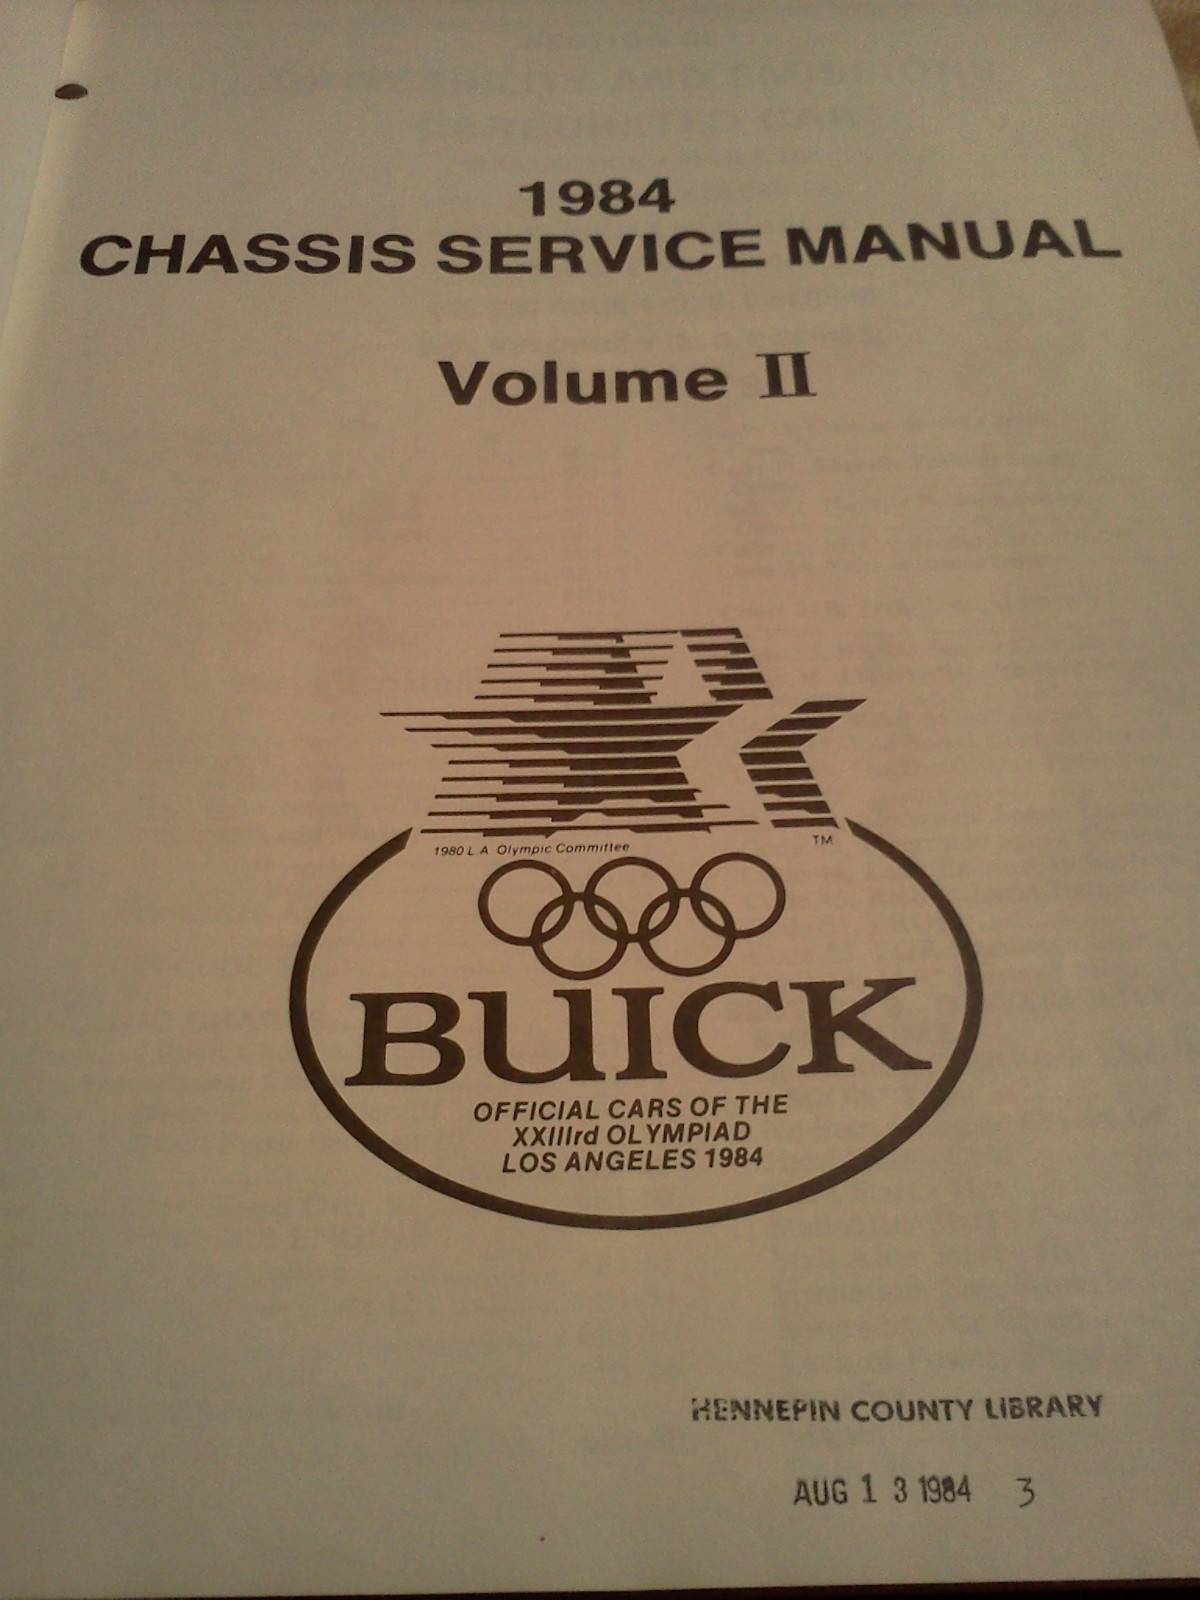 1984 Buick Chassis Service Manual